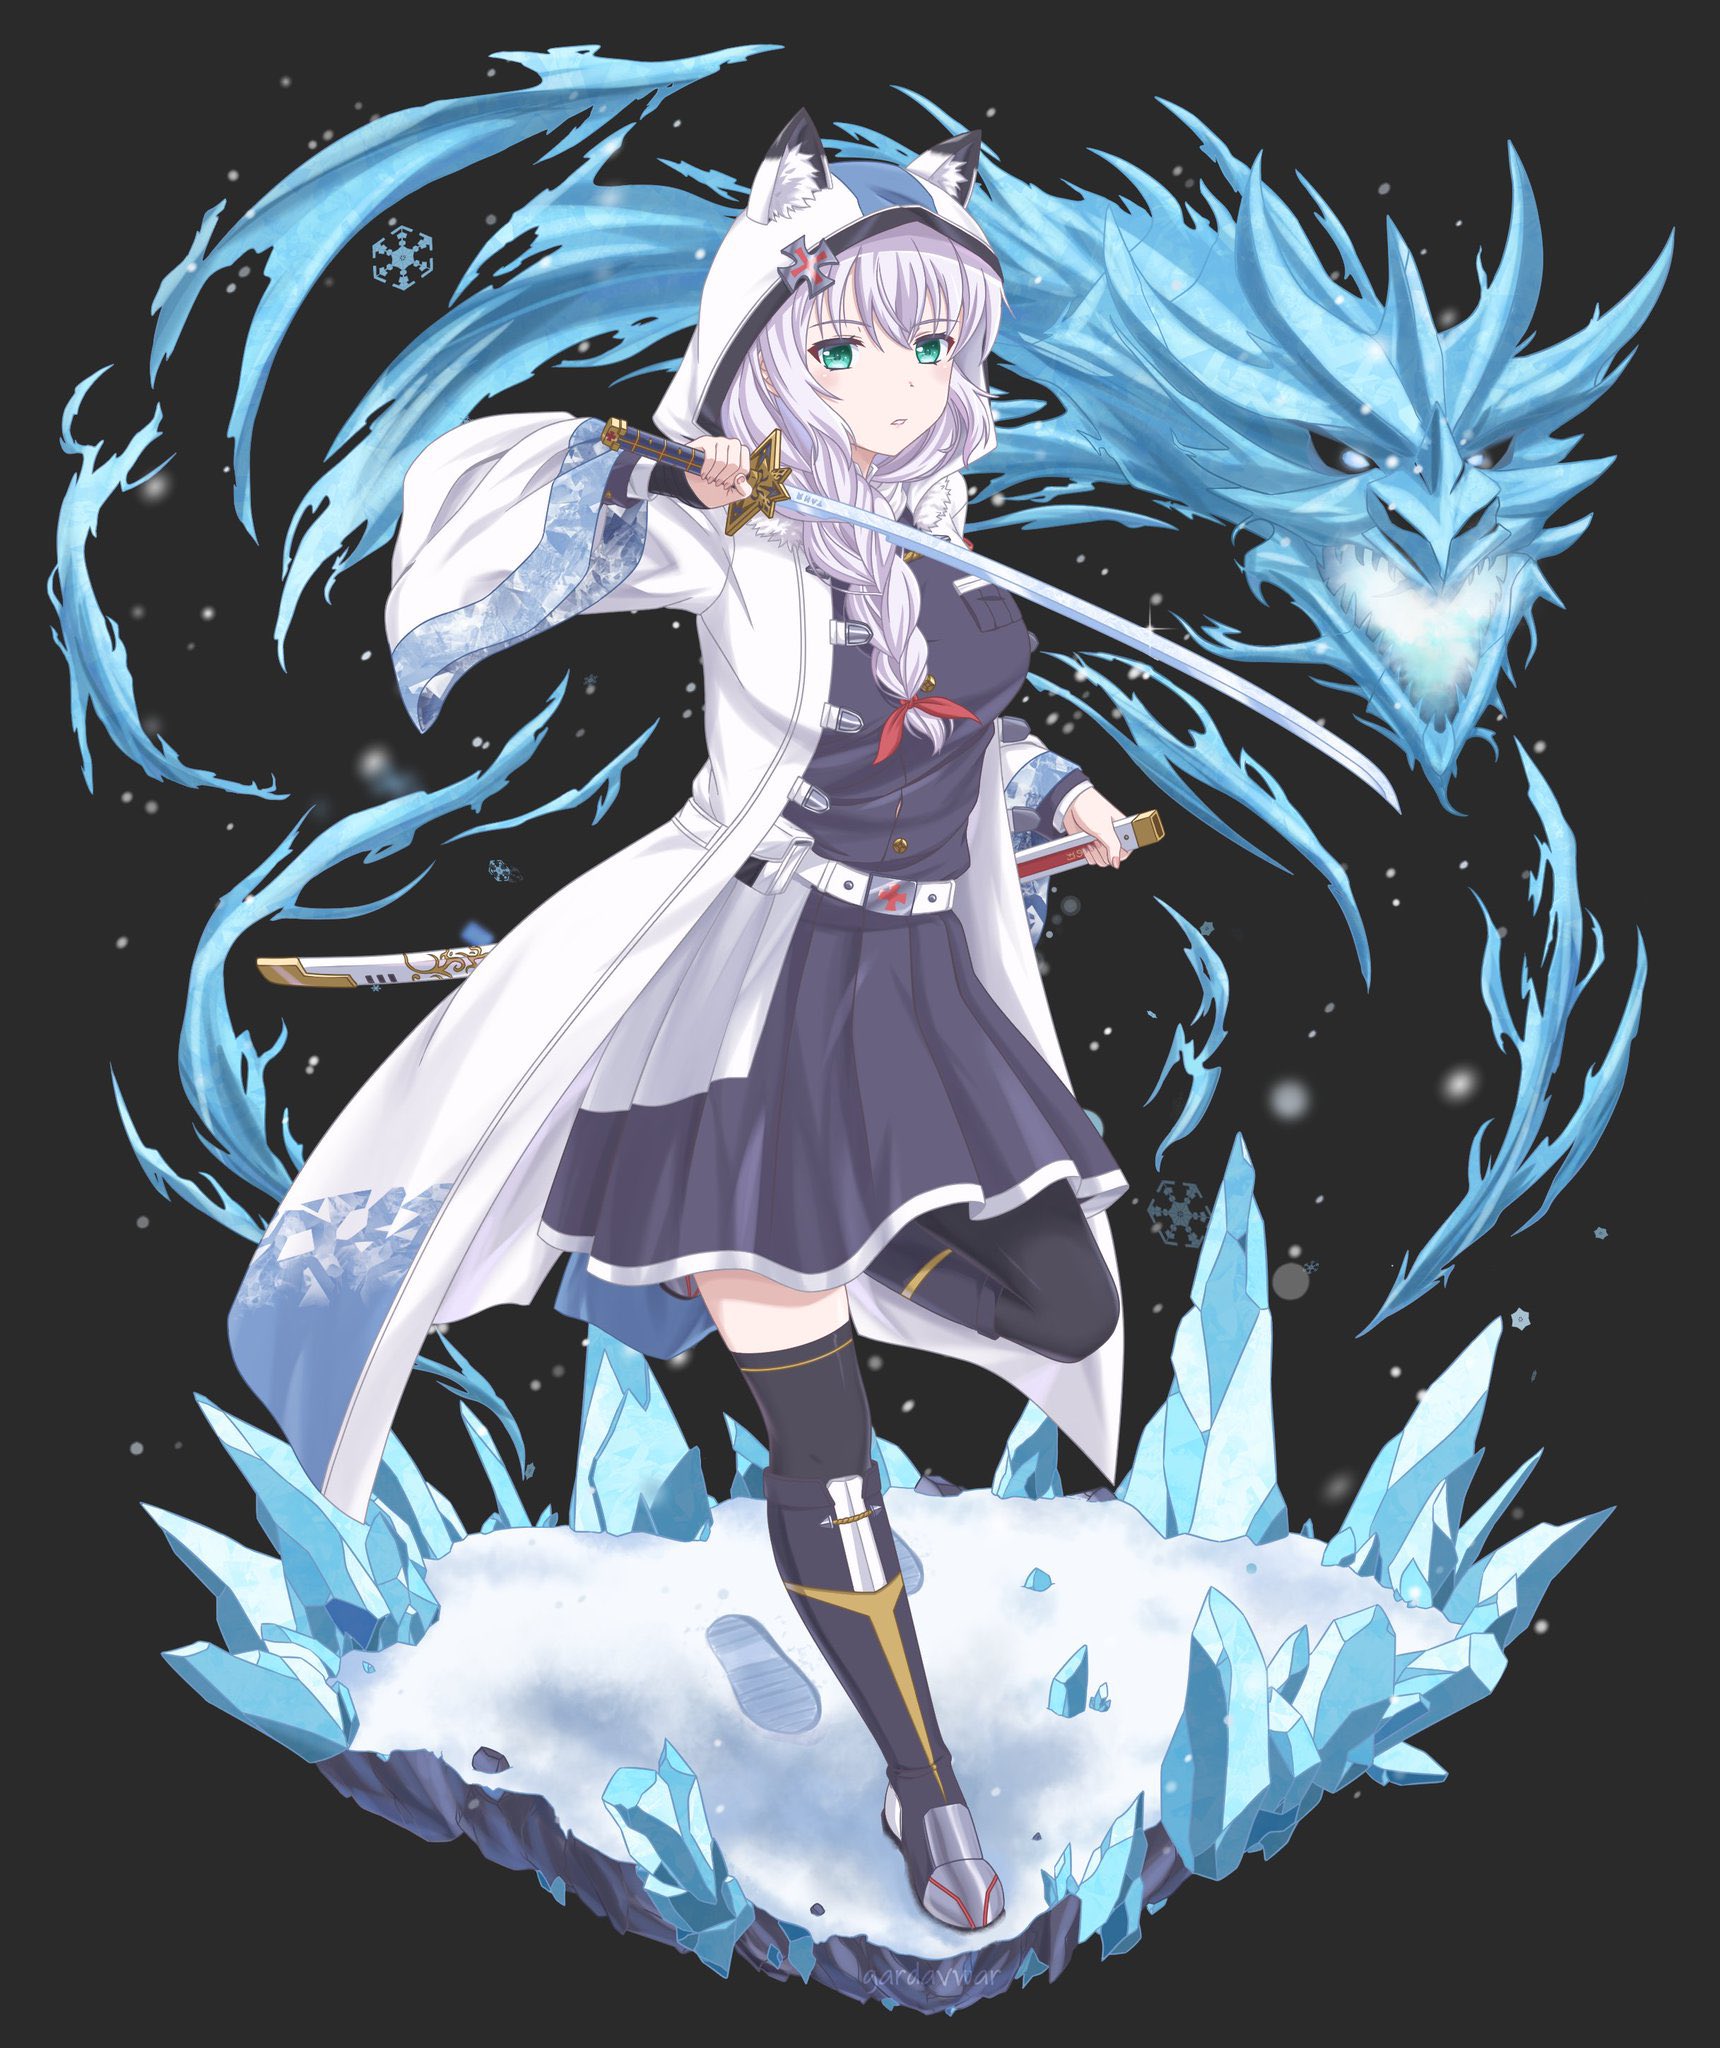 Snow Breathing, Project Slayers Wiki